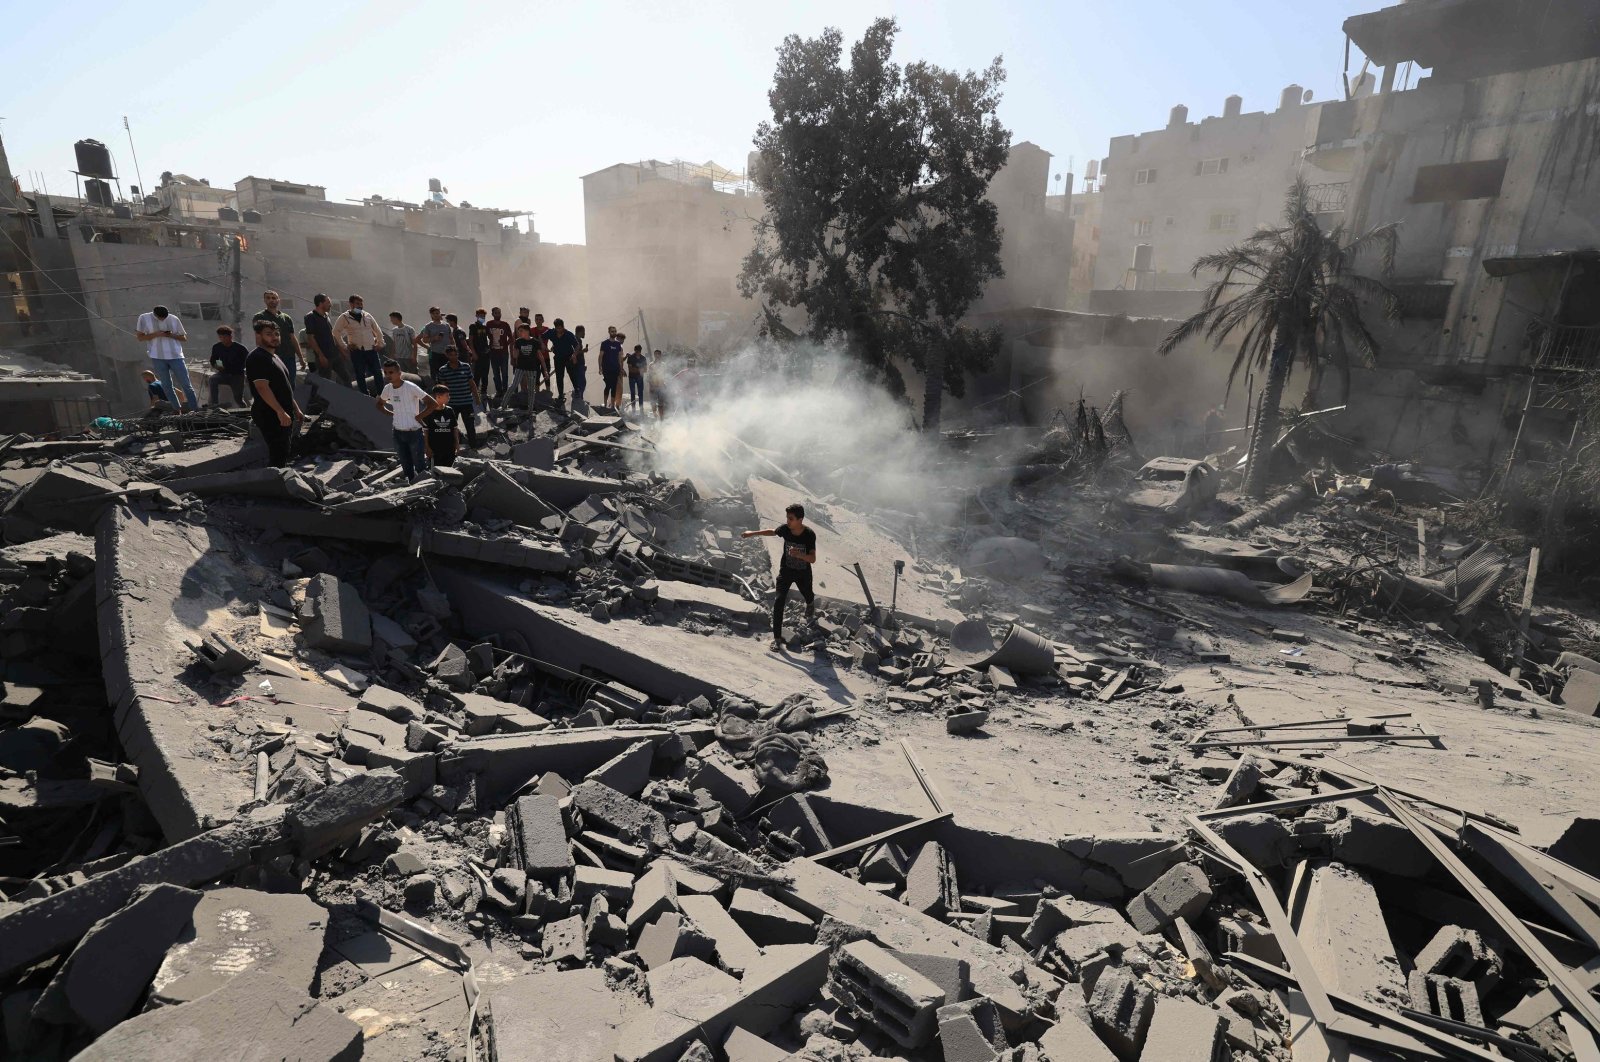 Palestinians search for survivors amid the rubble of buildings destroyed in Israeli bombardment, Khan Yunis, Gaza Strip, Palestine, Oct. 26, 2023. (AFP Photo)